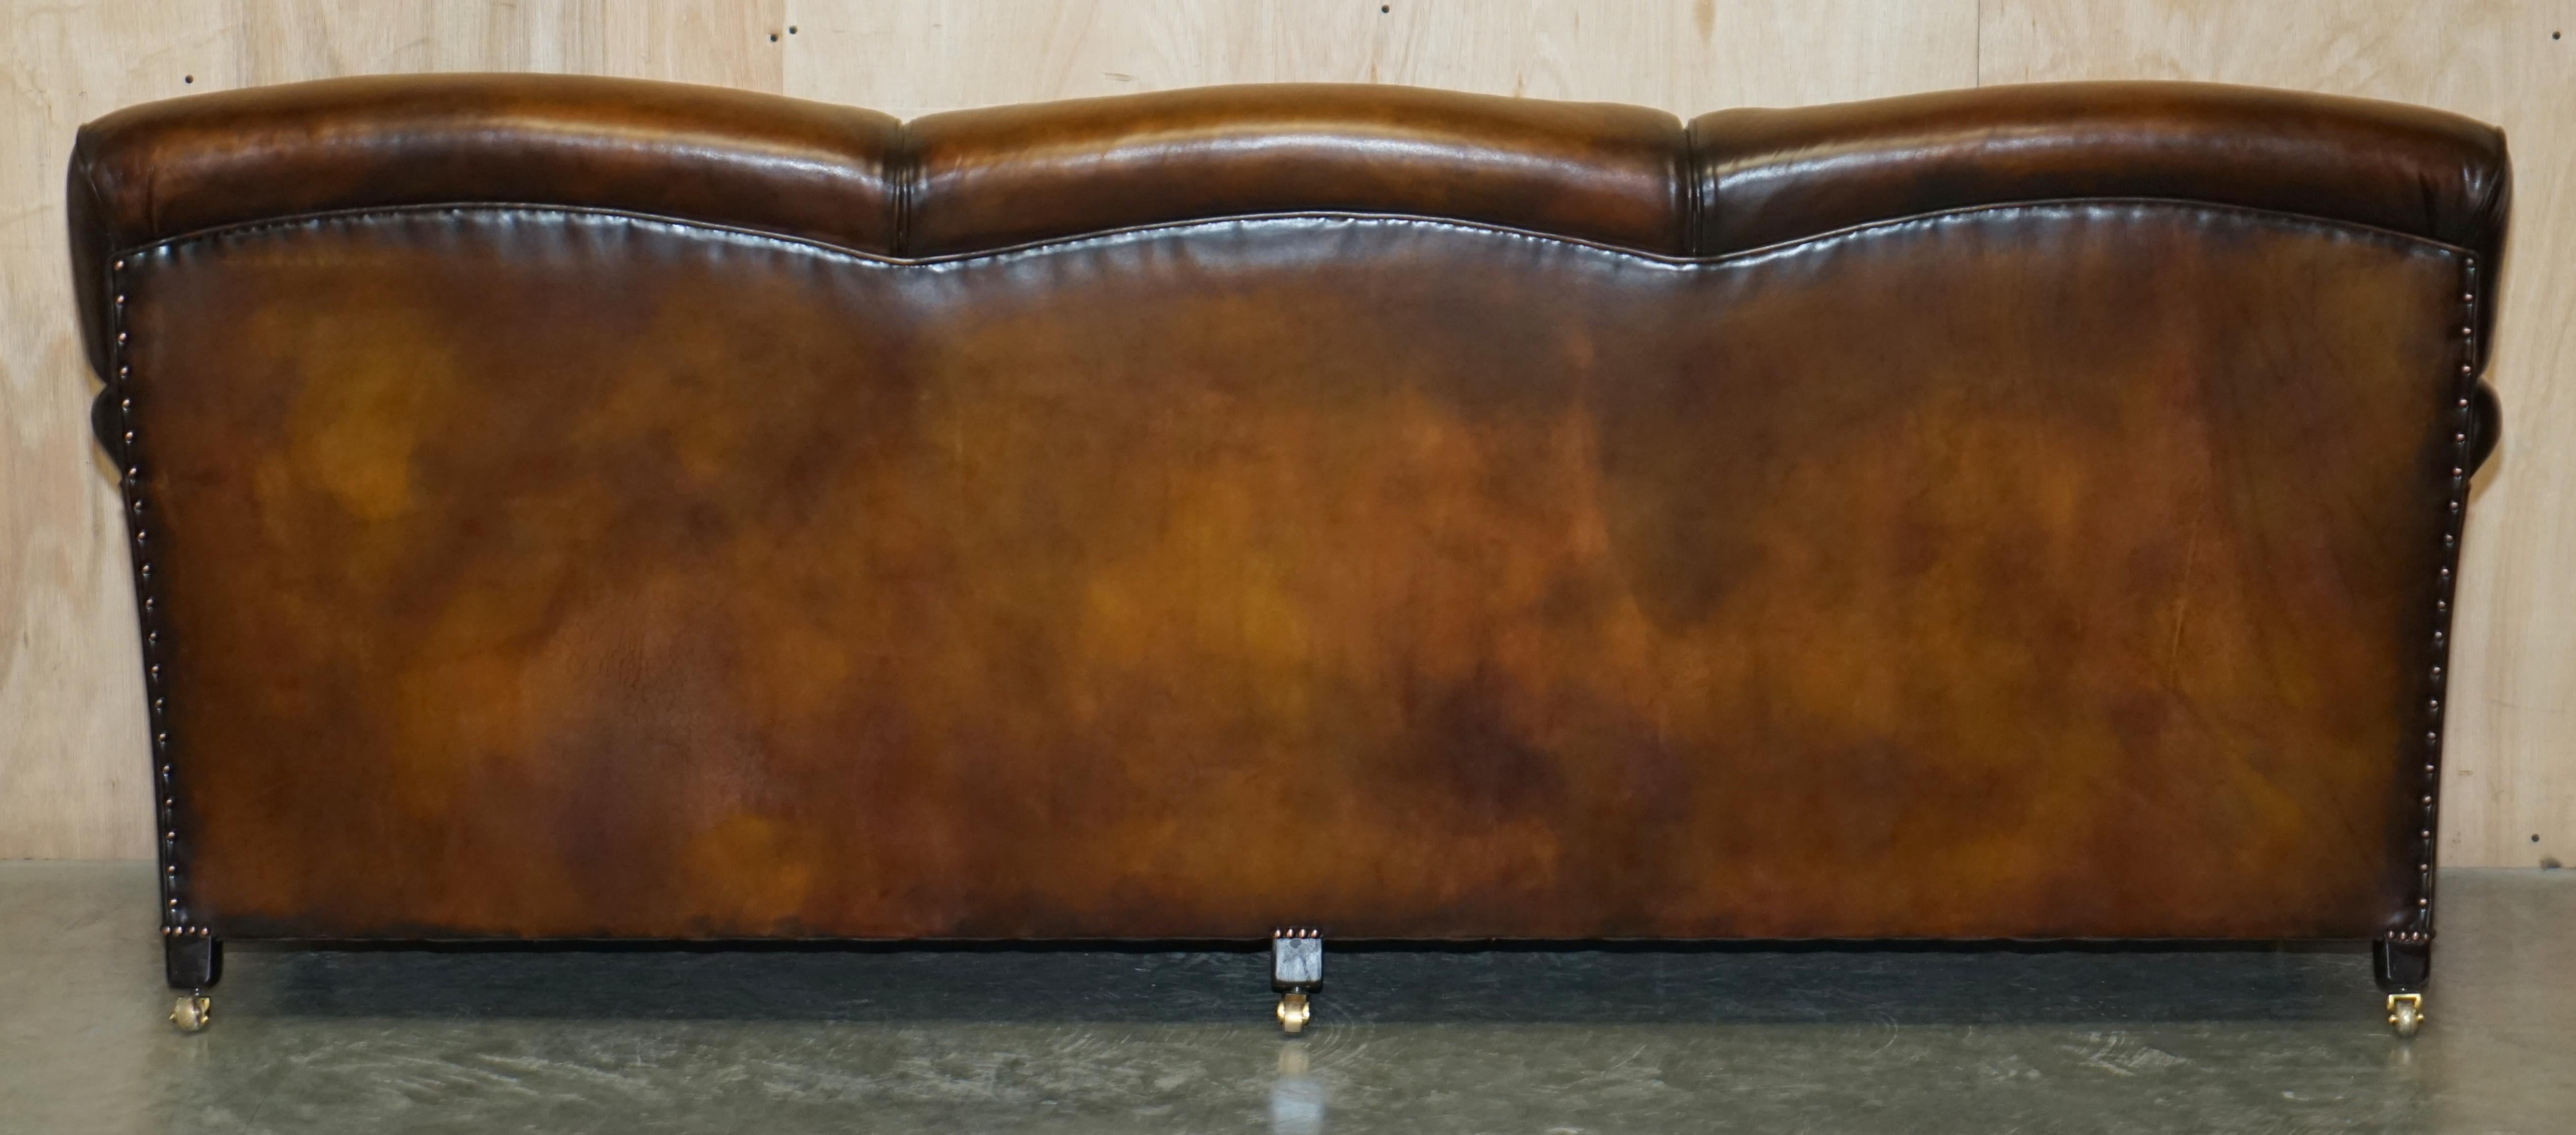 1 OF 2 LARGE GEORGE SMITH HOWARD & SON's BROWN LEATHER SIGNATURE SCROLL ARM SOFA For Sale 9